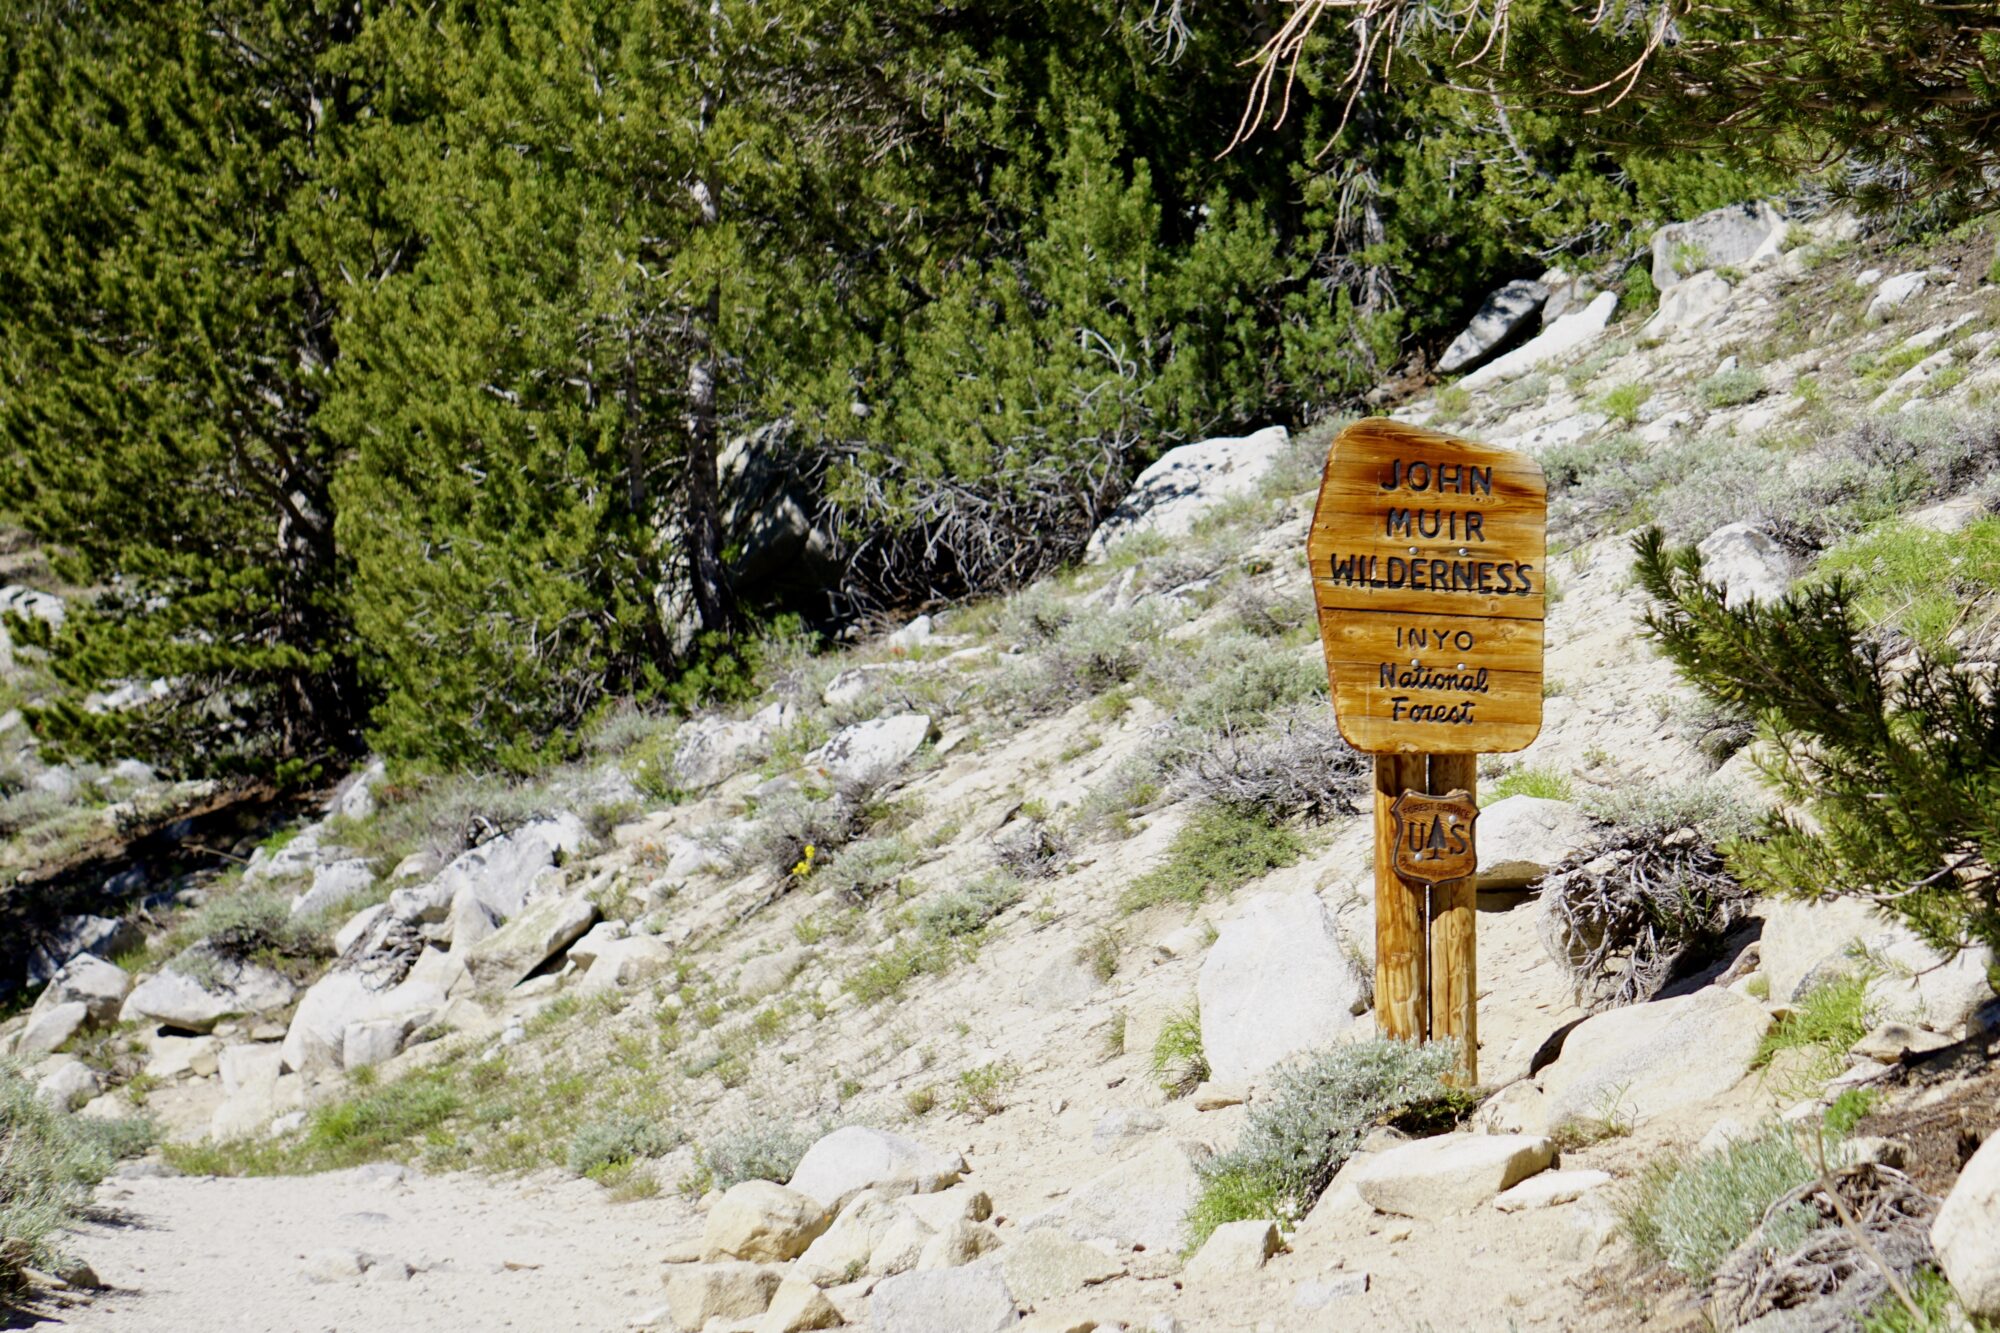 Inyo National Forest John Muir Wilderness Trail Marker at Little Lakes Valley Trailhead